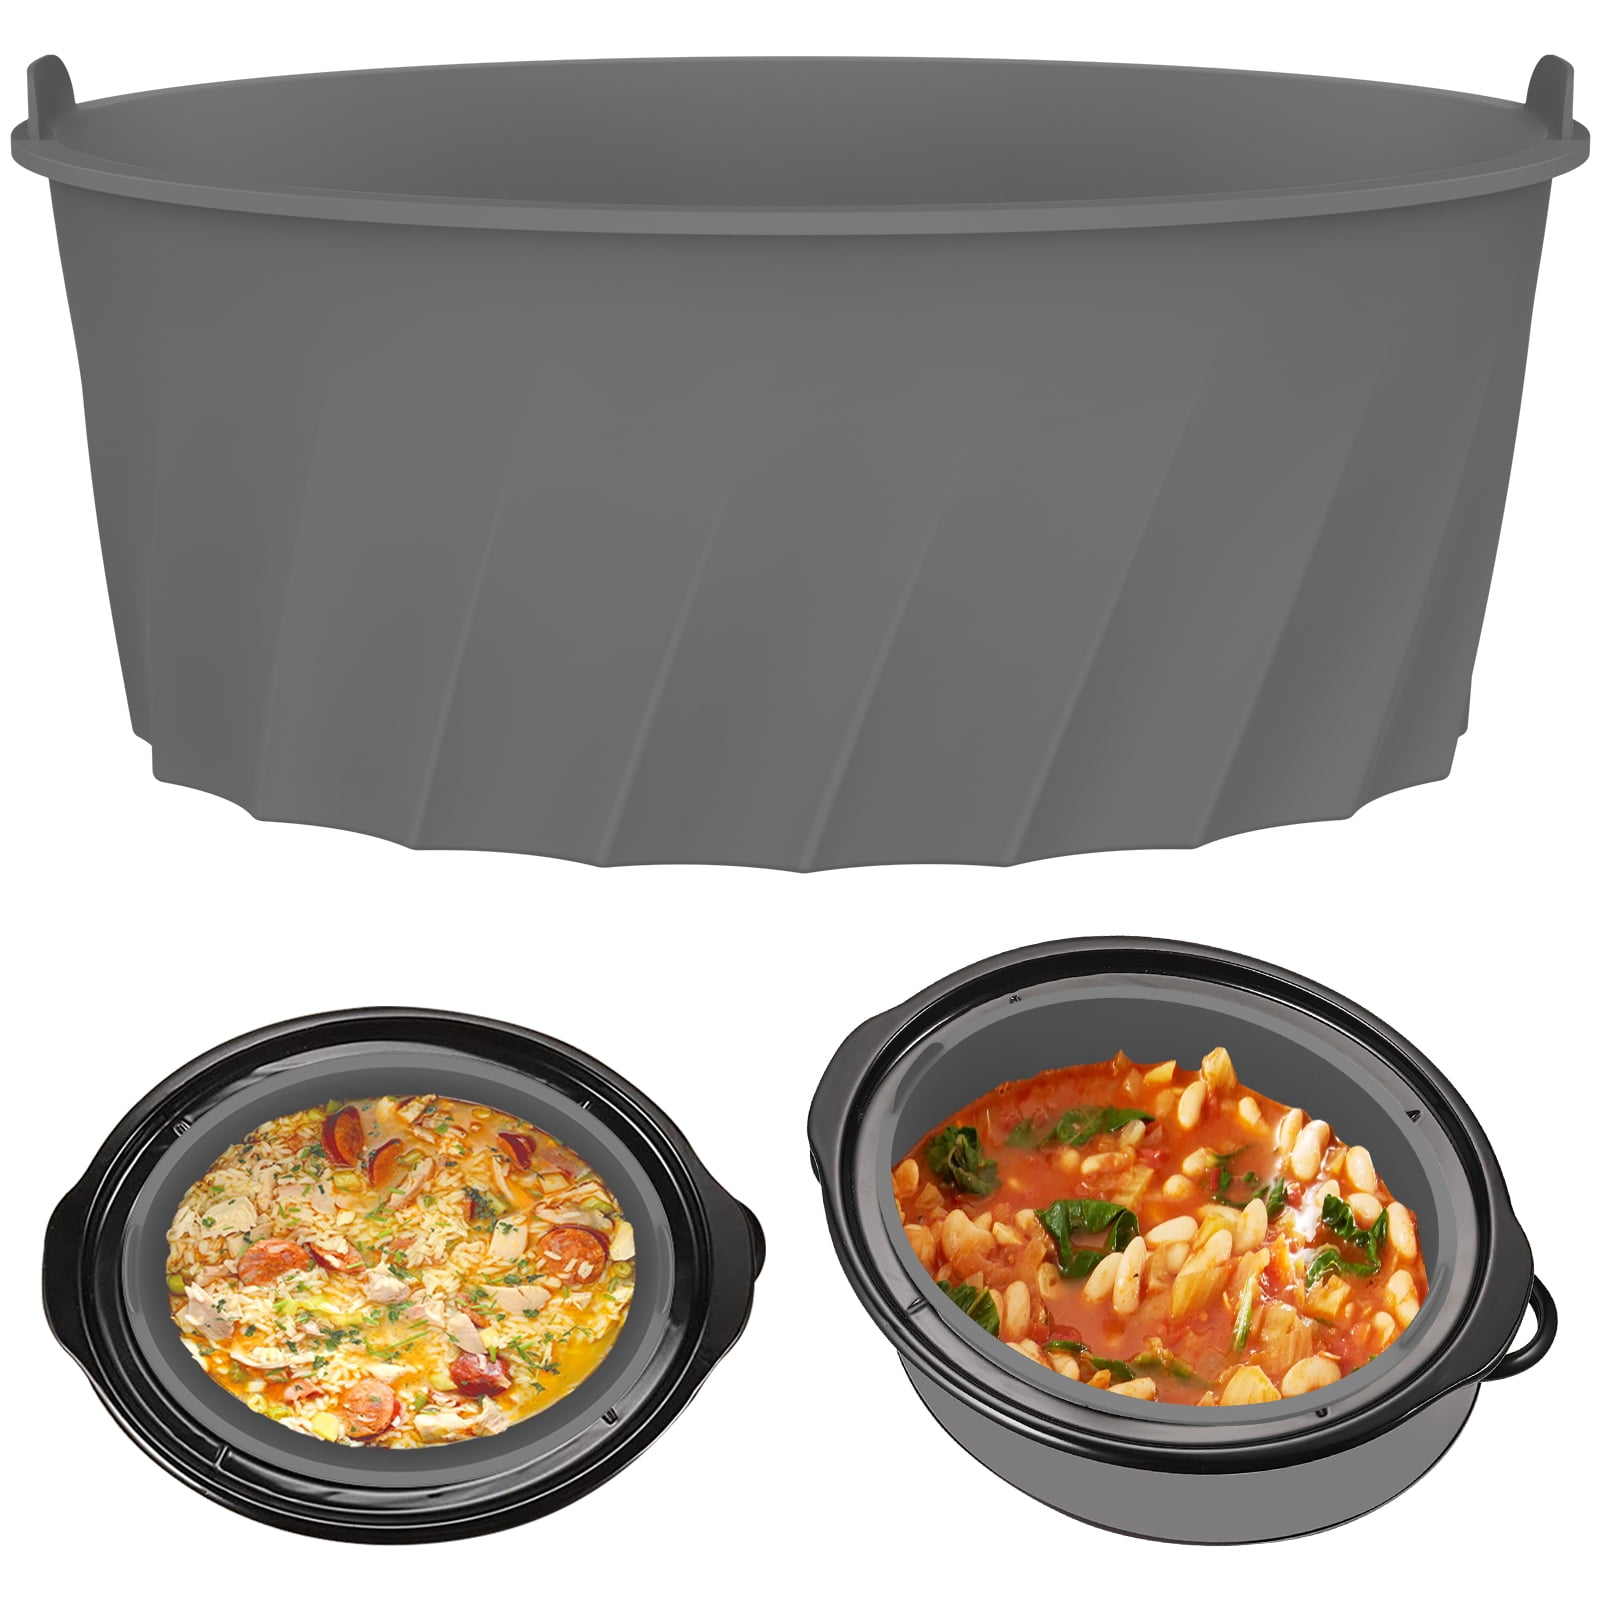  AMR Slow Cooker Liners, 2in1 Oval Silicone Crockpot Liner for  Cooking Two Dishes Simultaneously, Fits 5-6 Quart Crockpots - Leak Proof  Crockpot Insert Replacement for Crockpot 6 Quart, Dishwasher Safe: Home